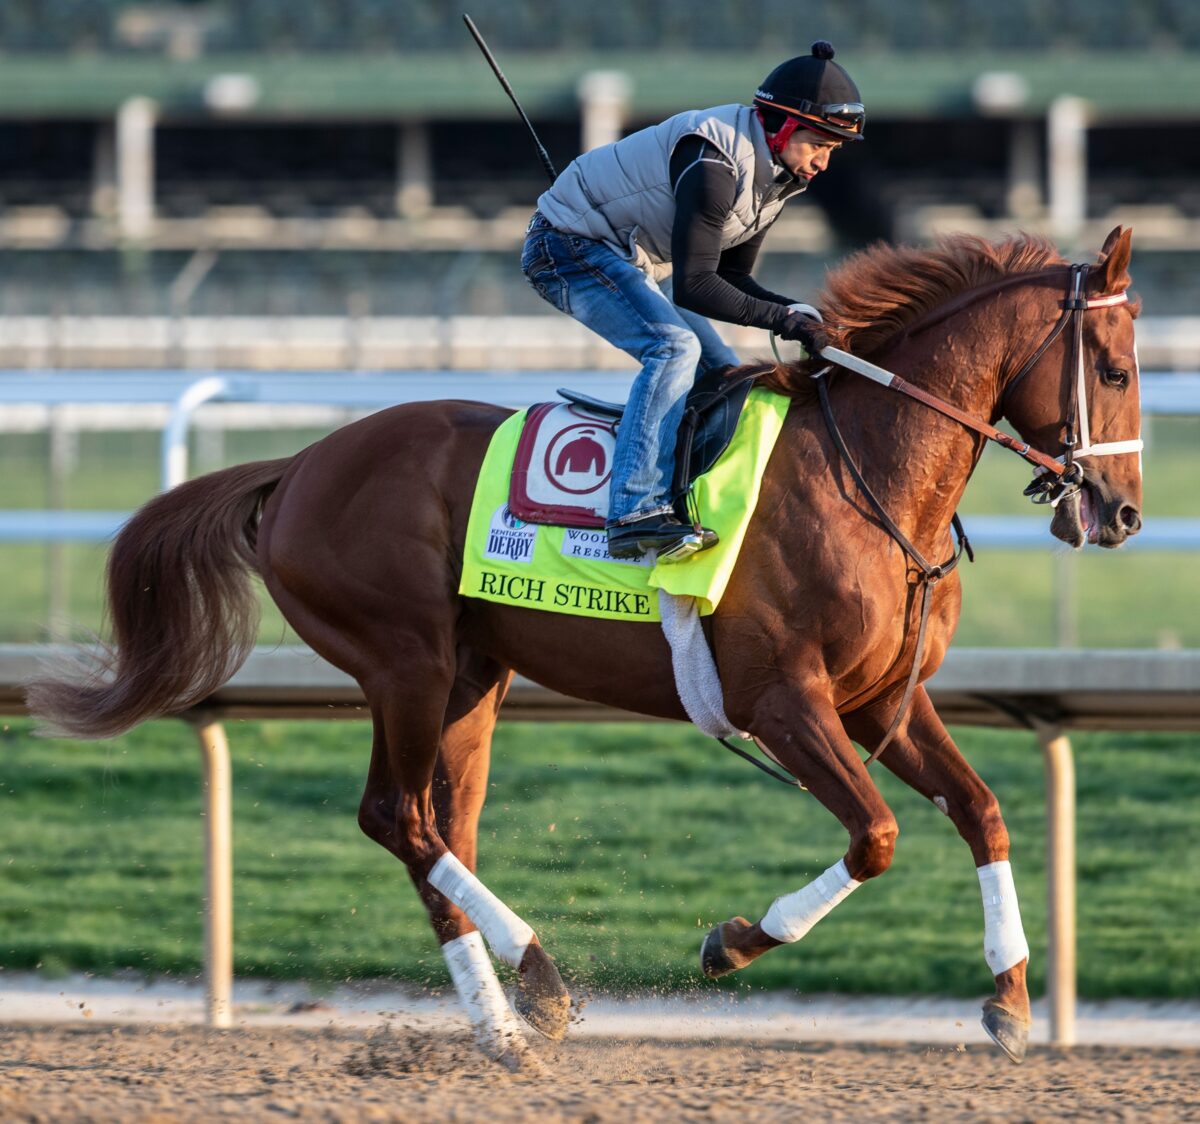 Rich Strike’s stunner and 4 other horses with the longest odds to win the Kentucky Derby